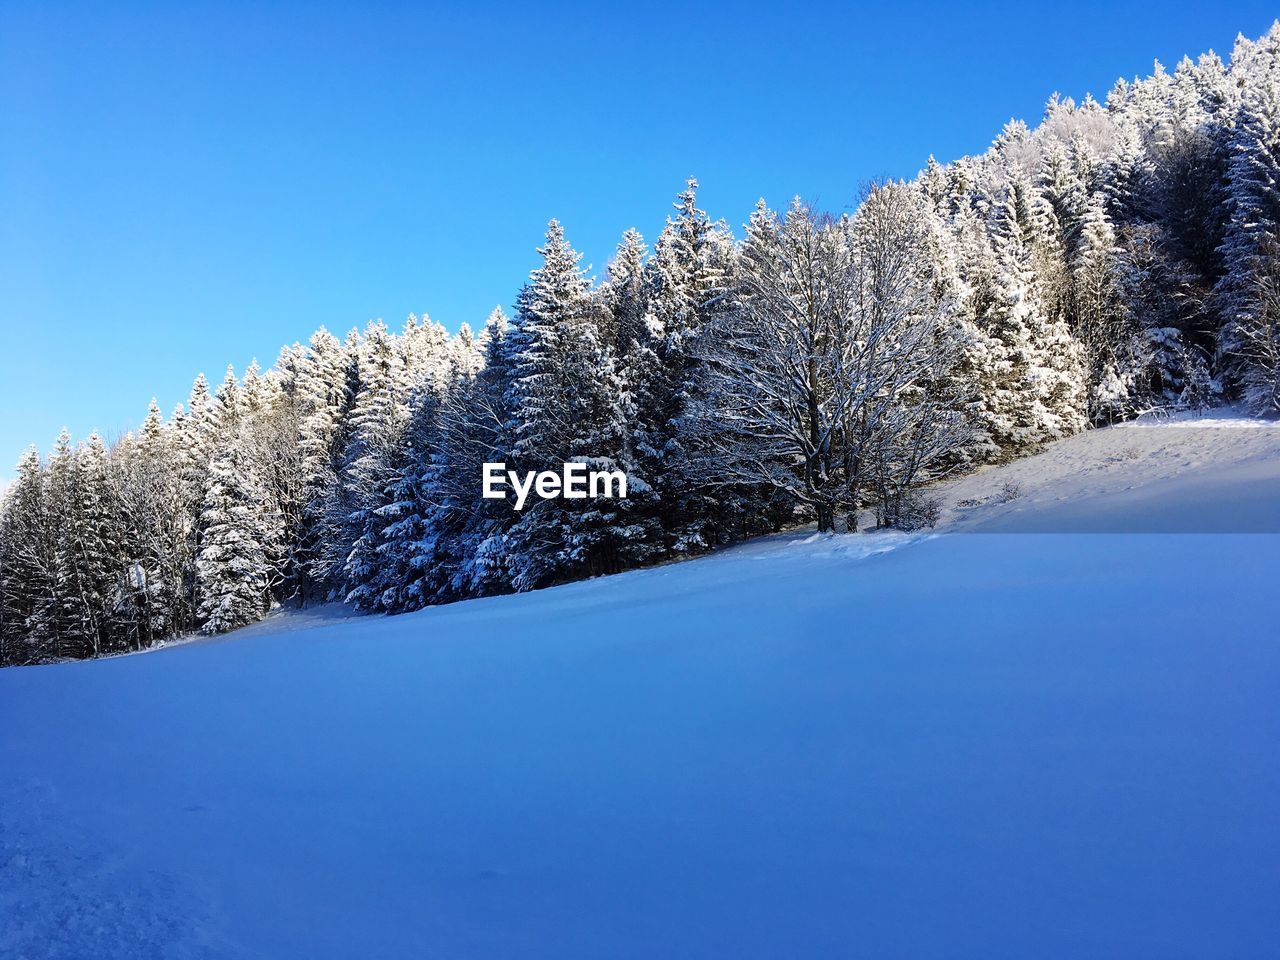 LOW ANGLE VIEW OF SNOW COVERED TREES AGAINST BLUE SKY